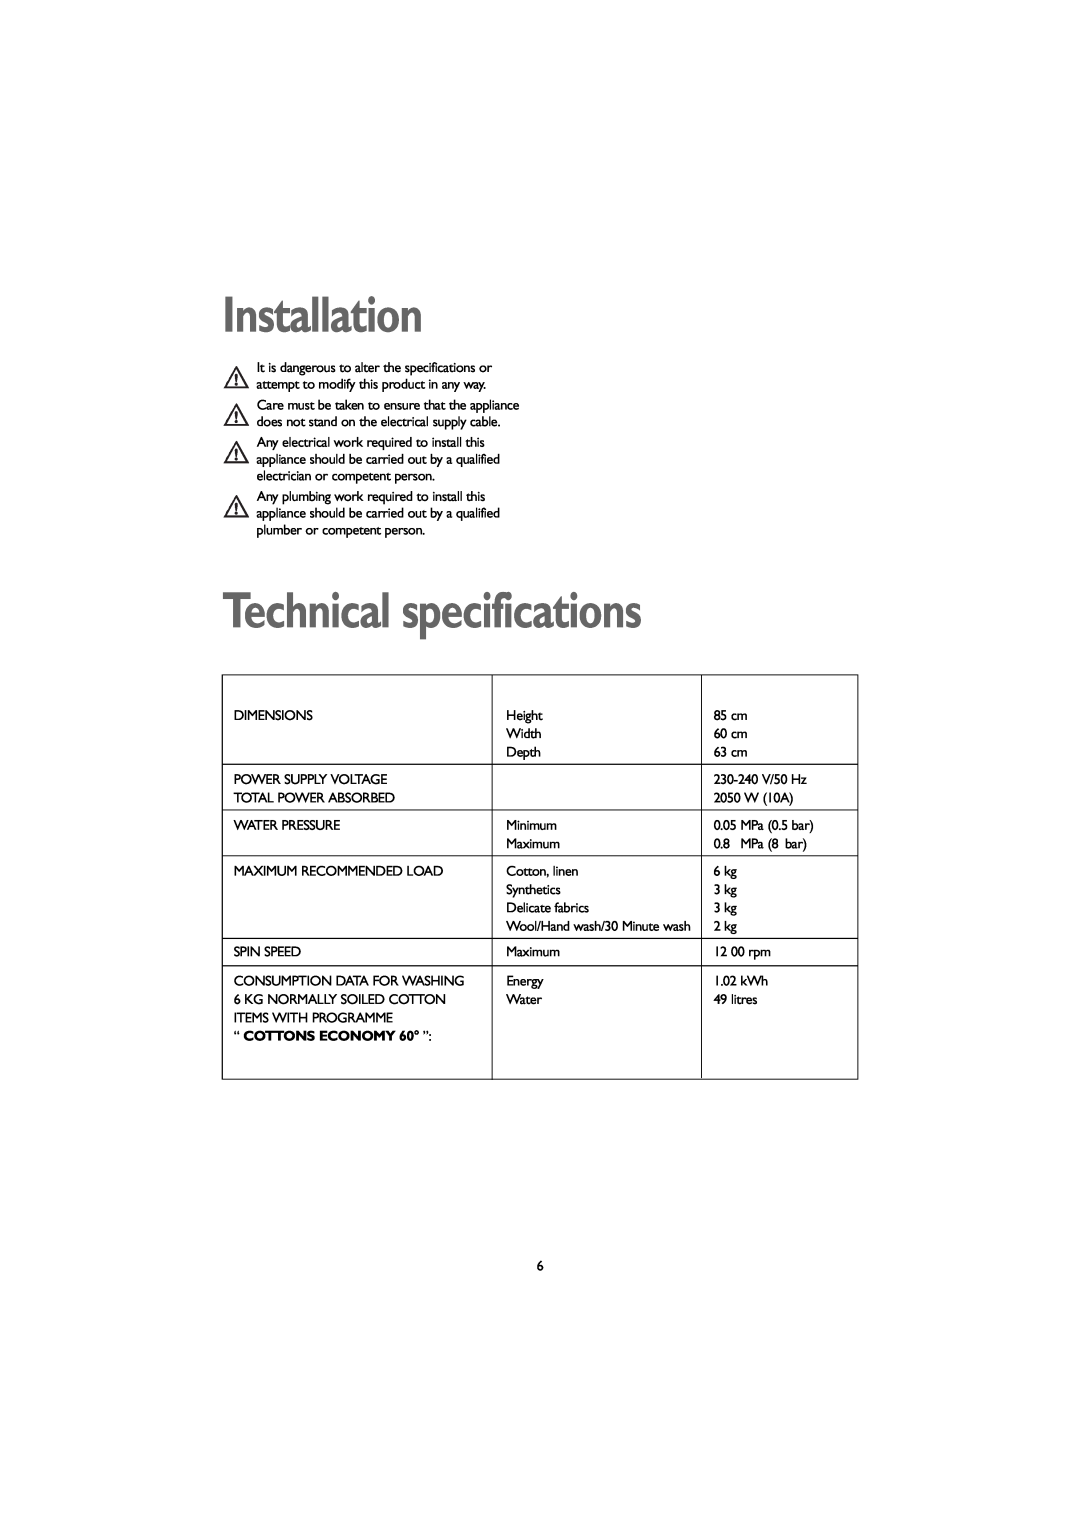 John Lewis JLWM 1203 instruction manual Installation, Technical specifications, “ COTTONS ECONOMY 60 ” 